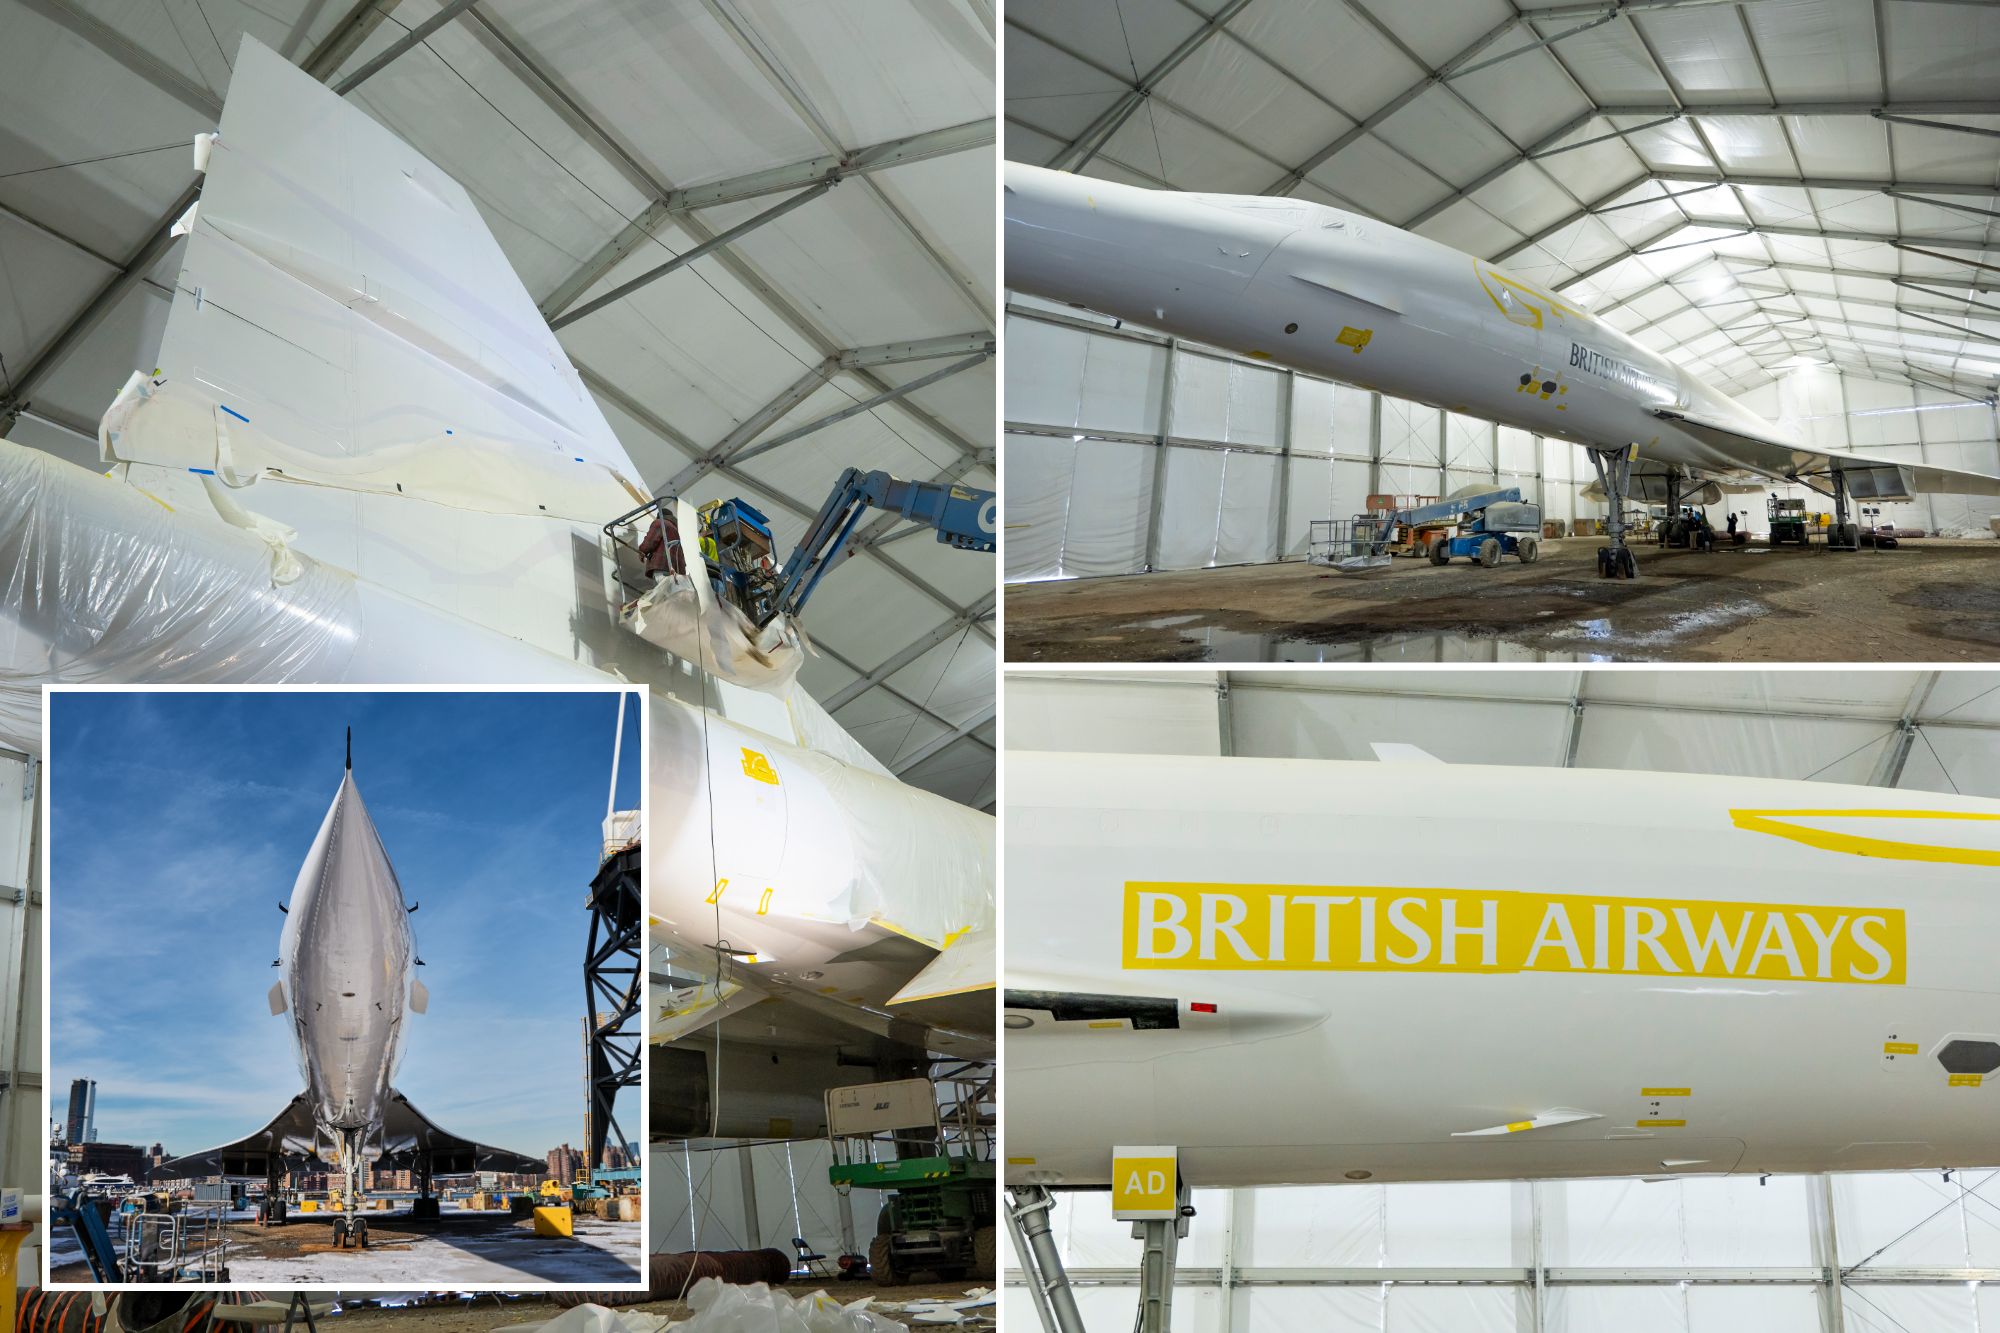 The Intrepid Museum’s BA Concorde undergoes its first major paint job.